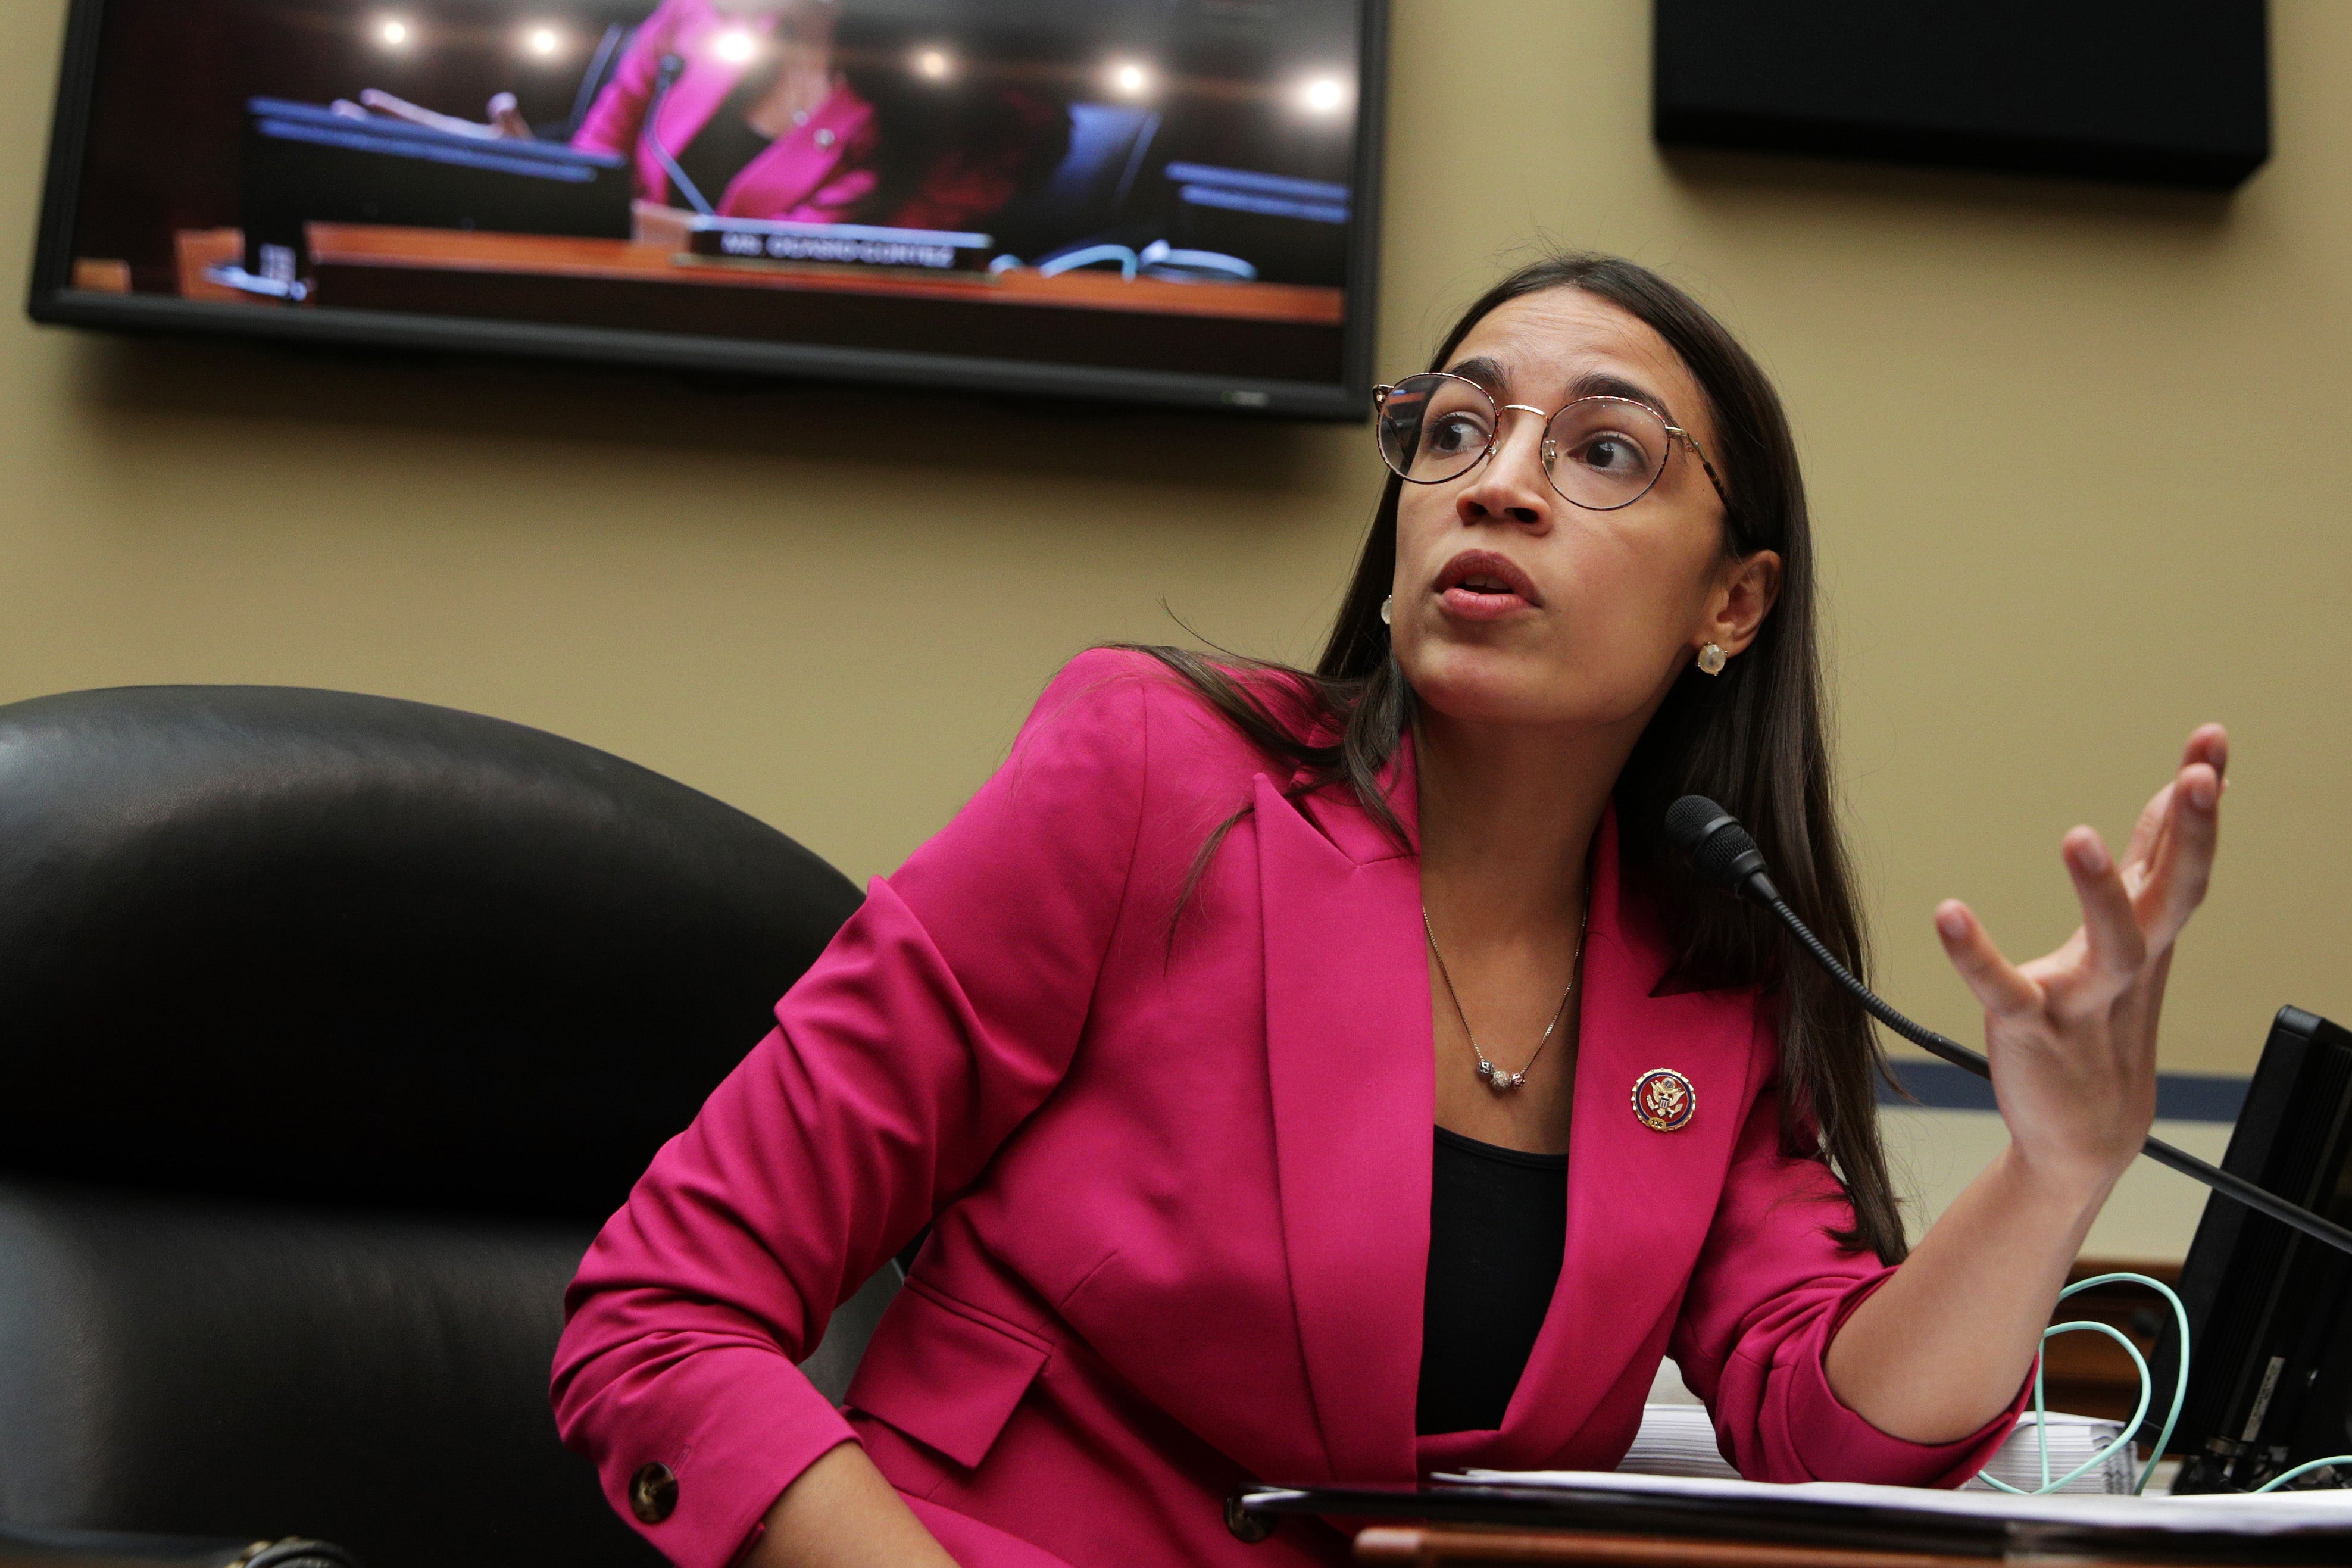 Ocasio-Cortez On Trump Food Stamp Cuts: ‘If This Happened Then, We Might’ve Just Starved’